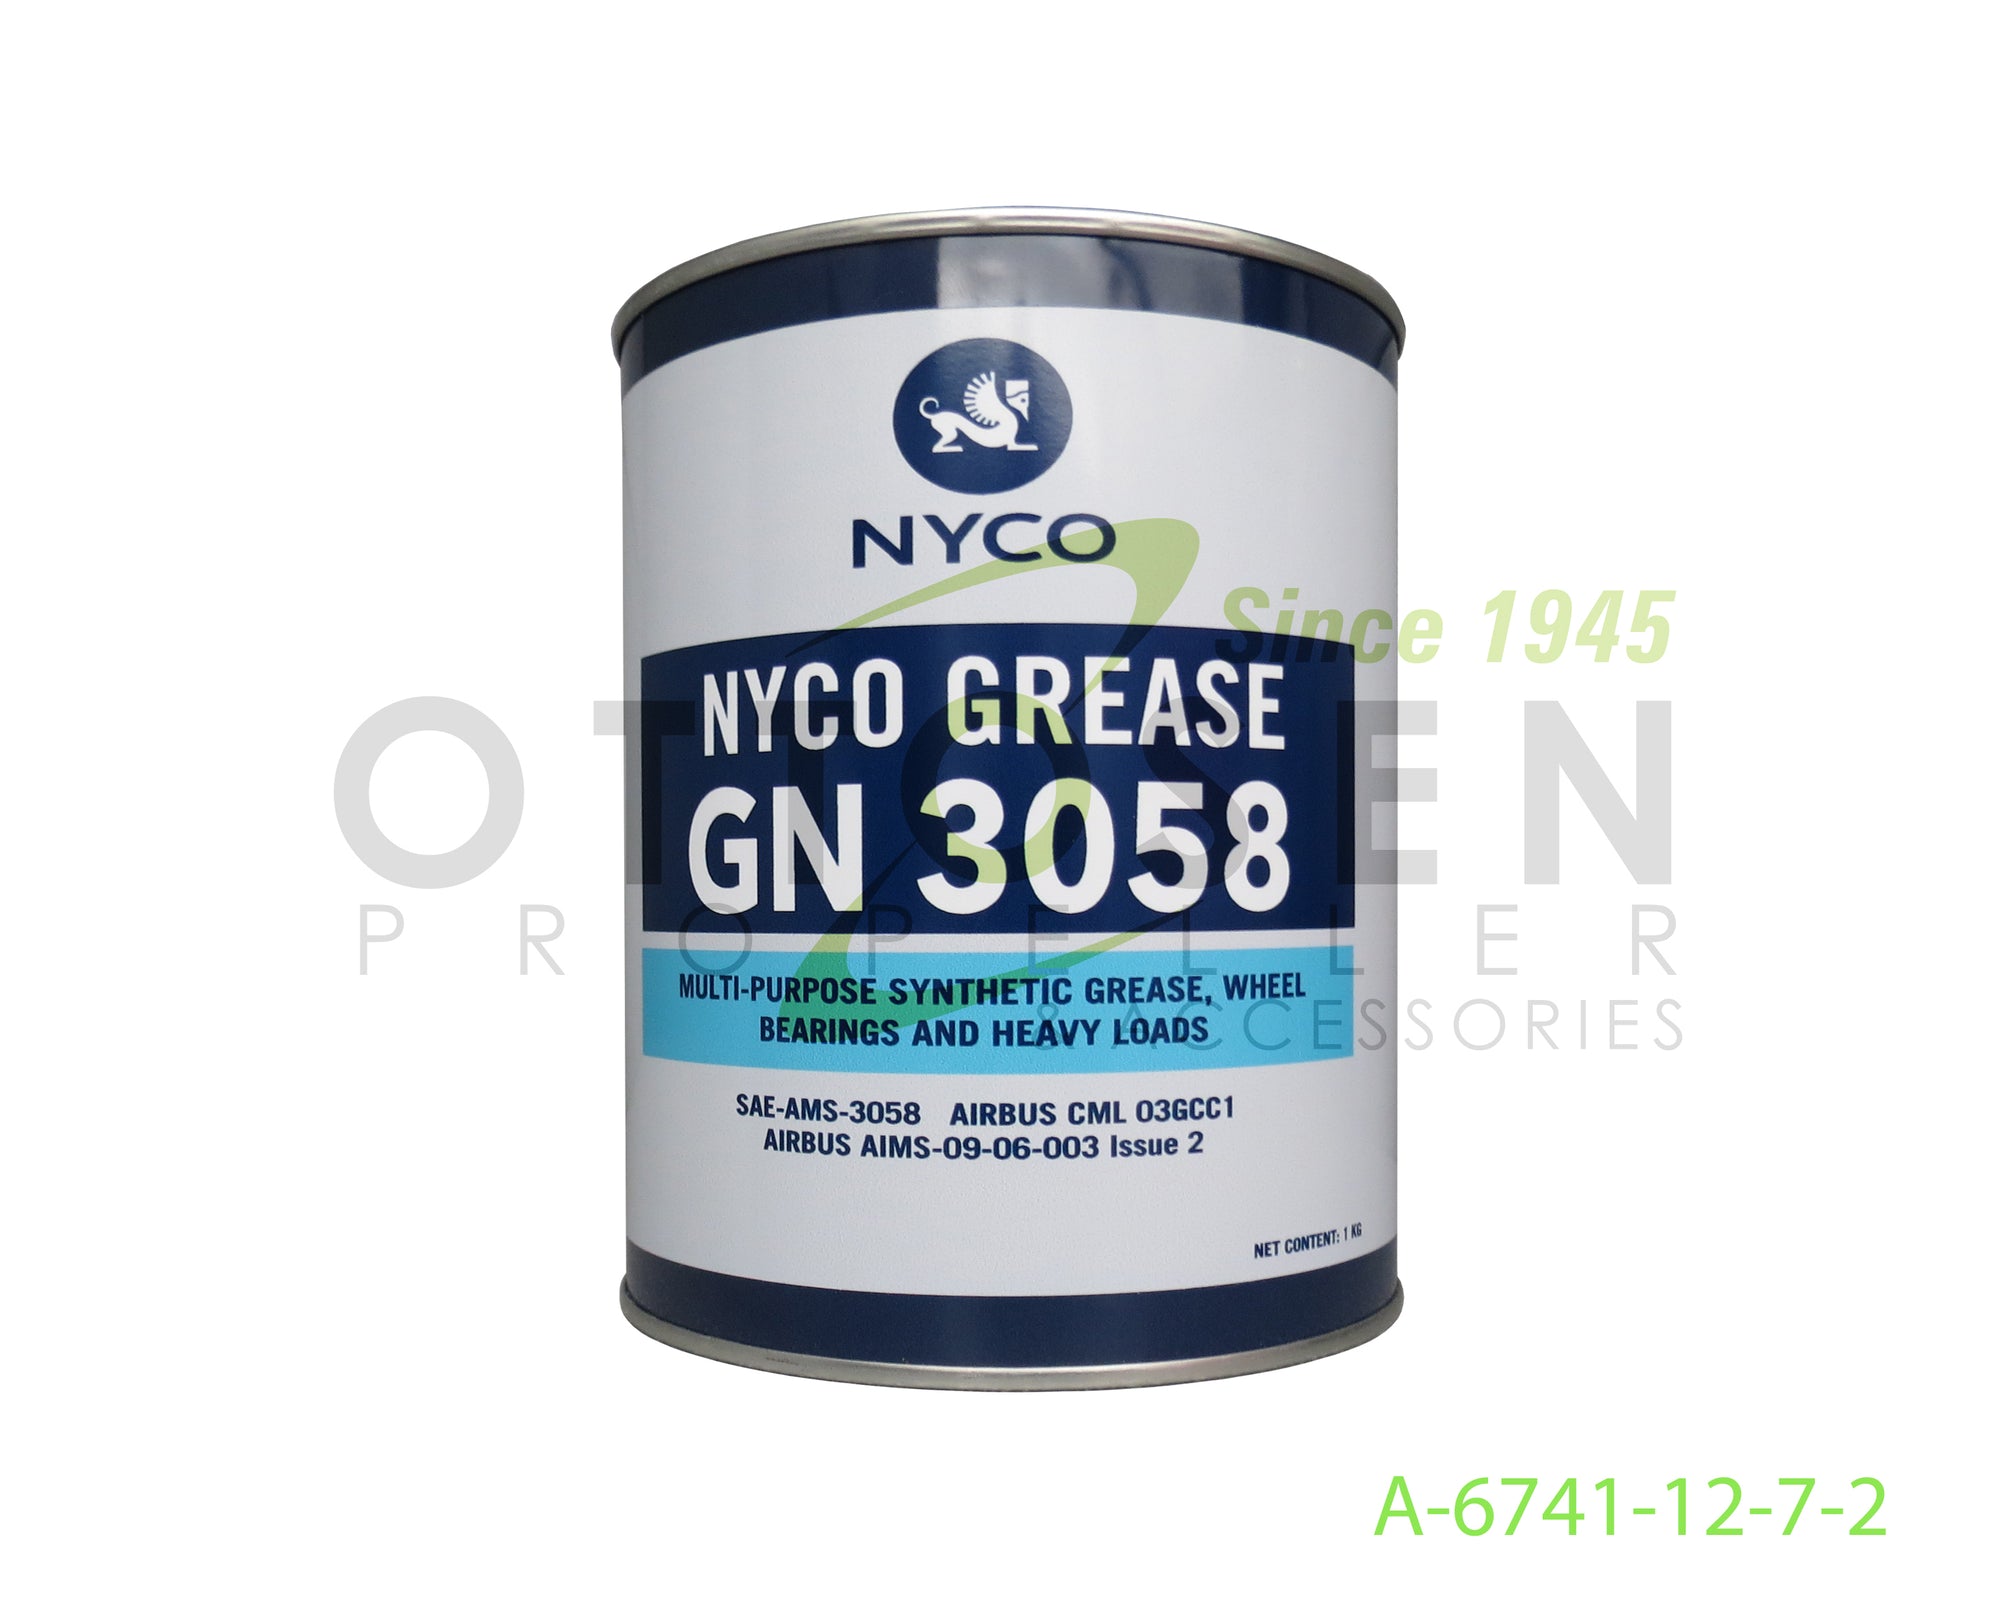 A-6741-12-7-2-HARTZELL-PROPELLER-KILO-CAN-NYCO-GREASE-GN-3508-PICTURE-1